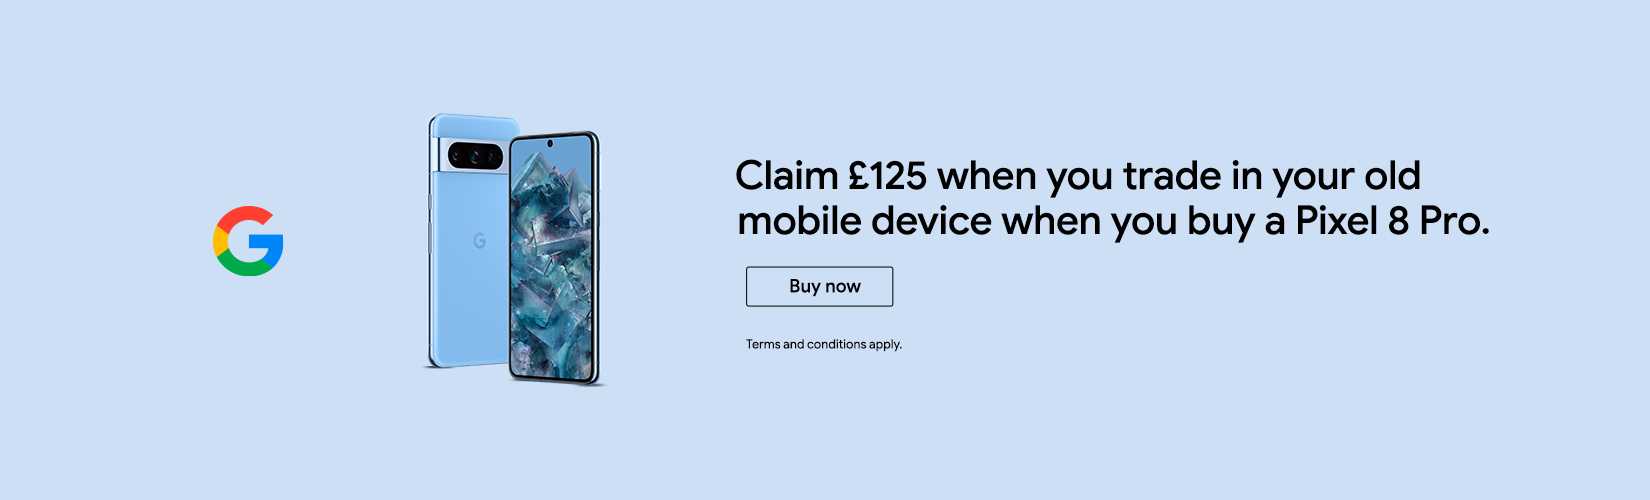 Claim £125 when you trade in your old mobile device when you buy a Pixel 8 Pro.